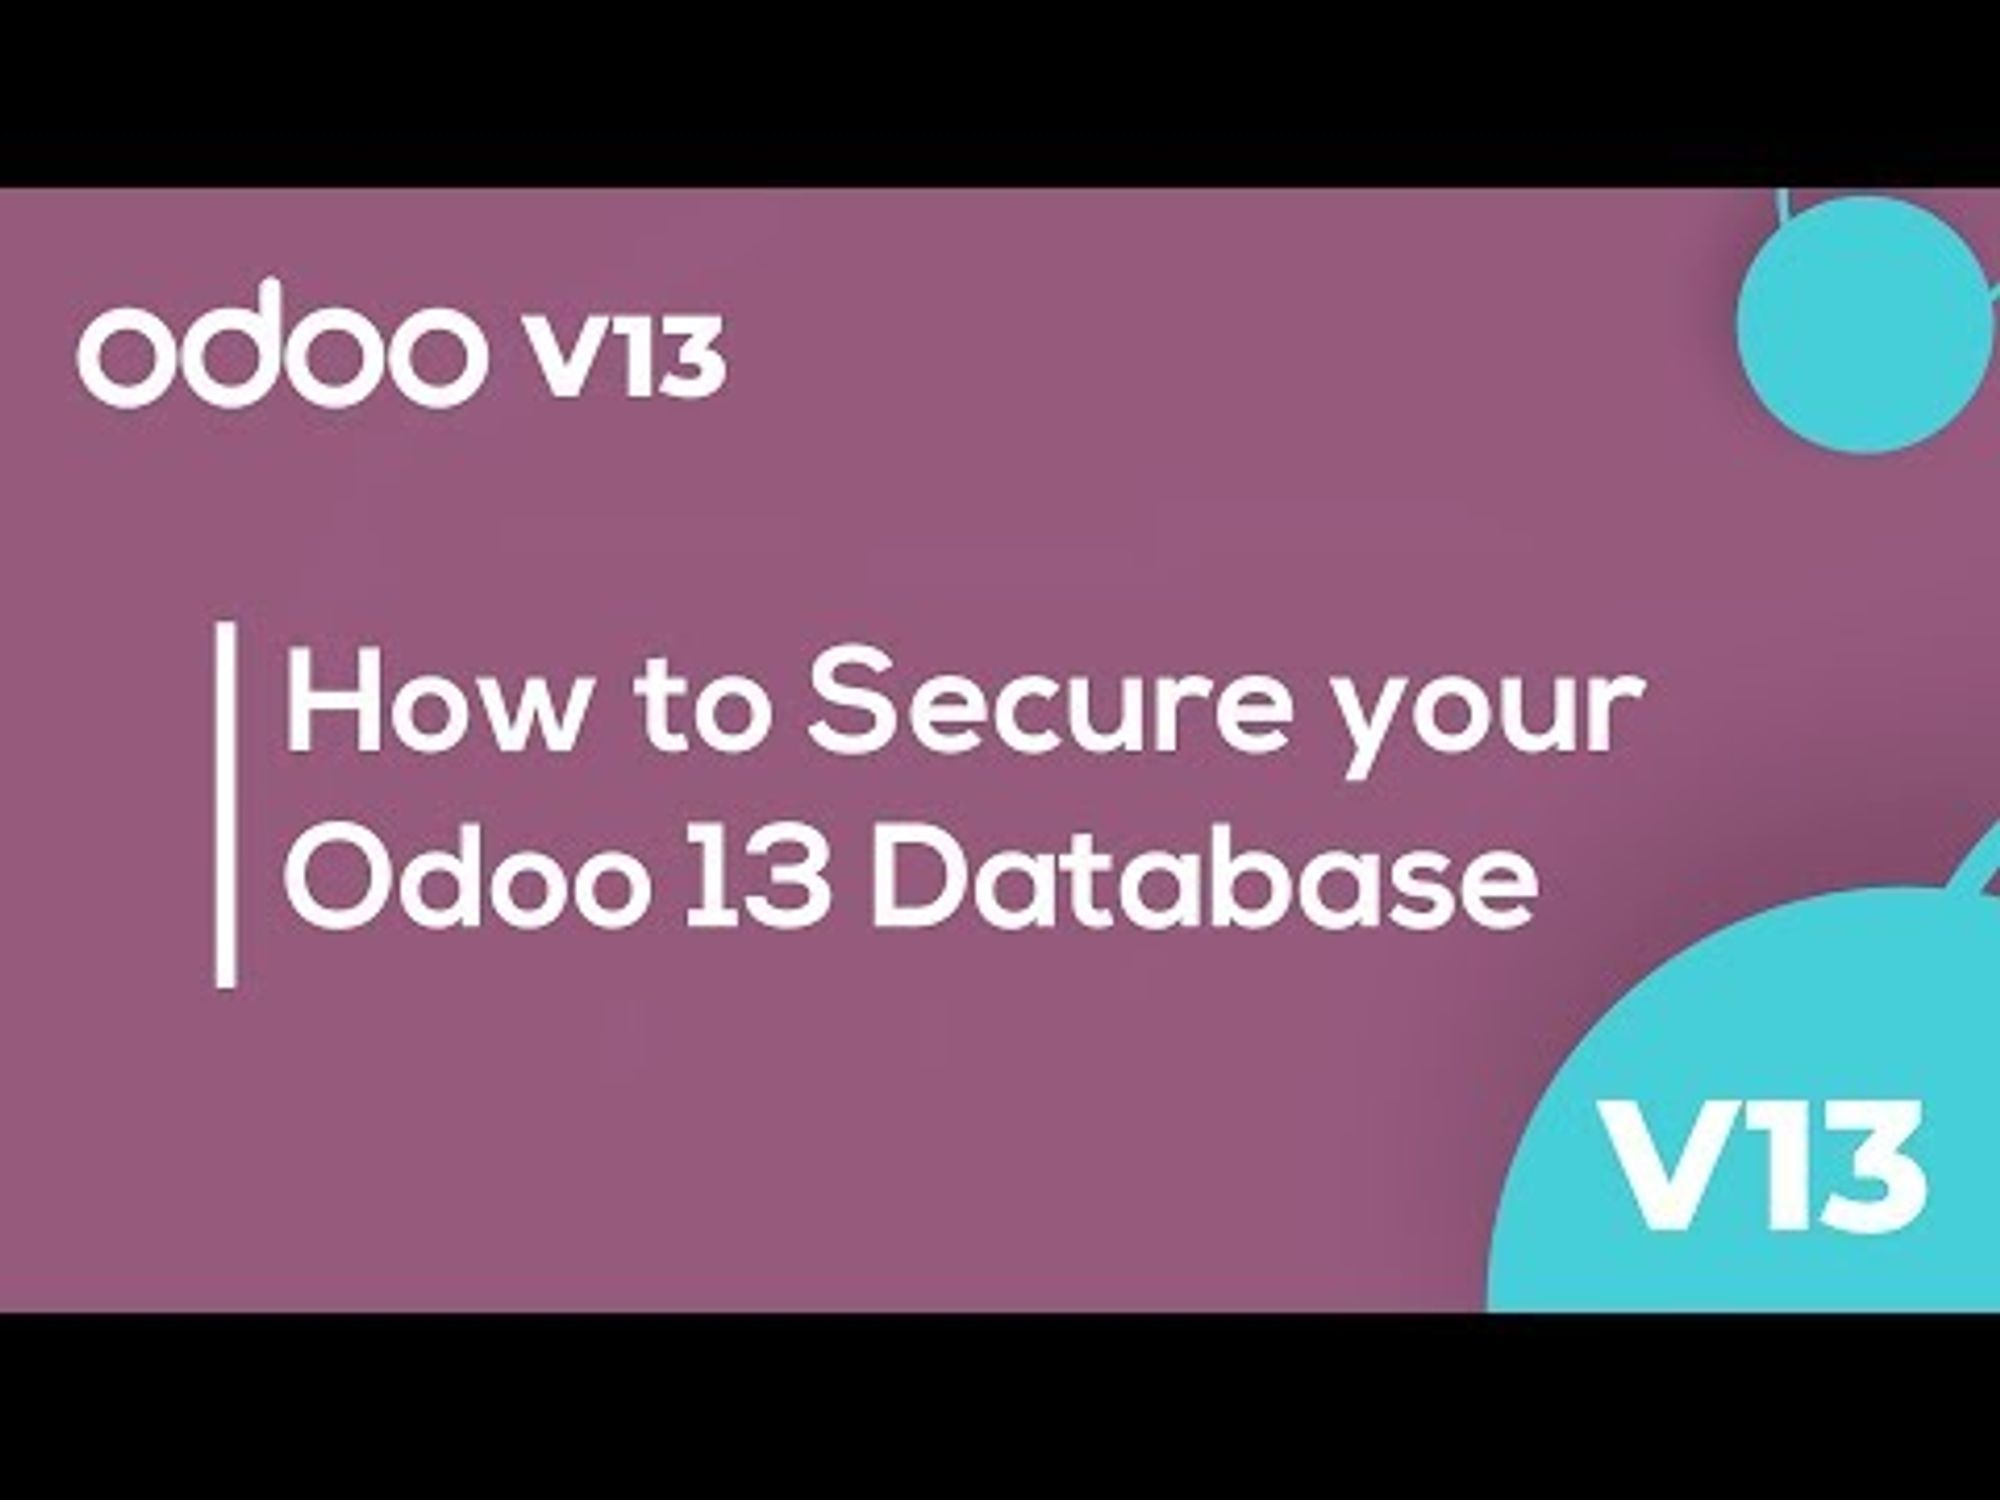 How to secure your Odoo 13 database?